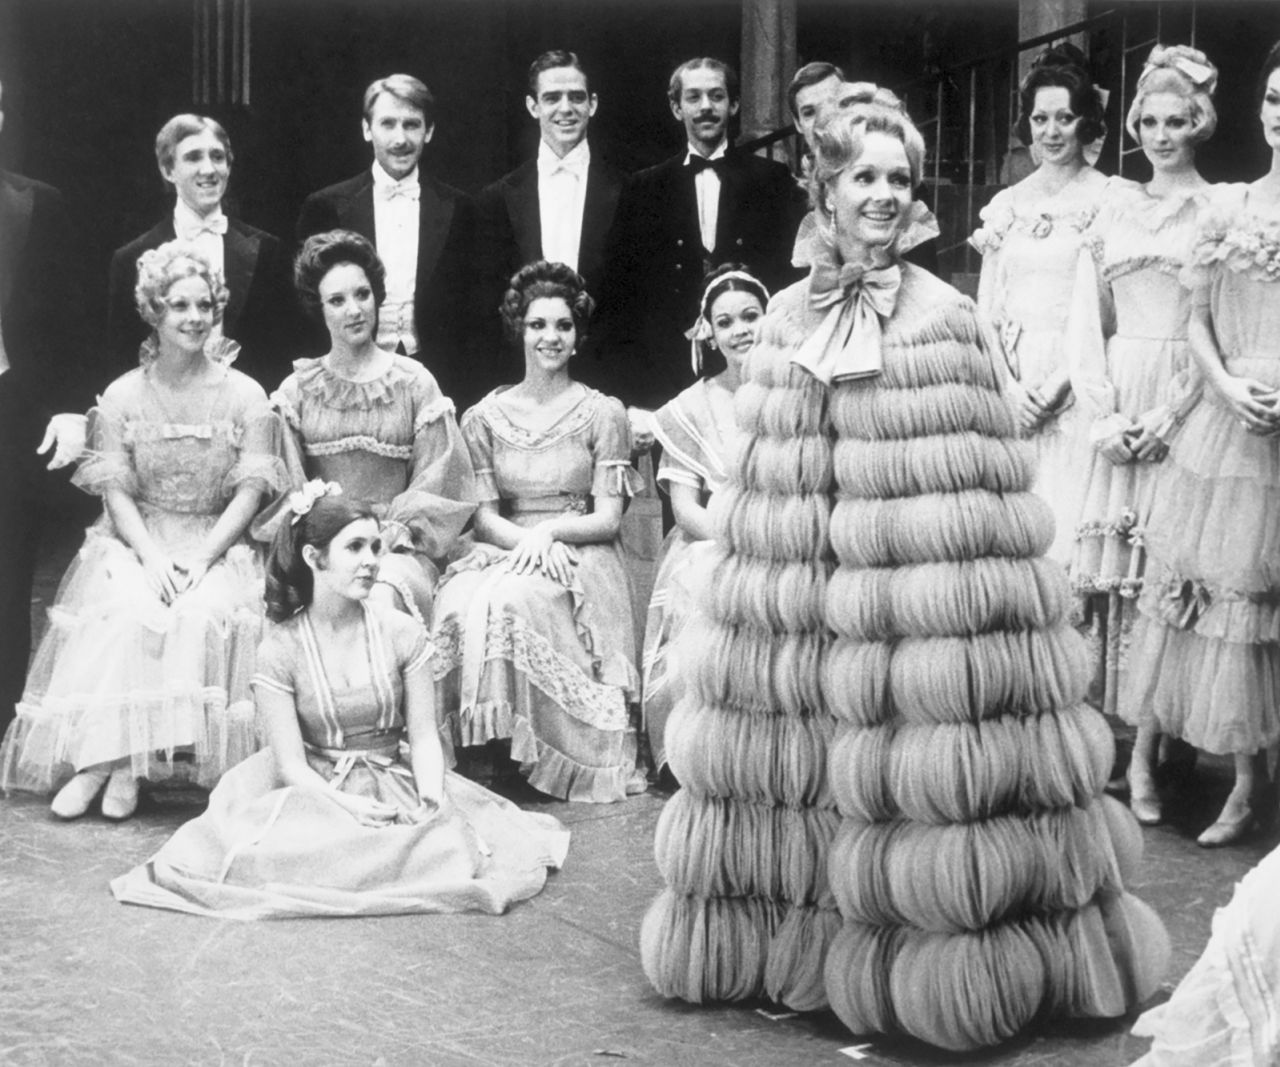 A teenage Fisher, sitting on the floor, appears with her mother, front right, in a Broadway remake of the musical "Irene" in 1973. Fisher dropped out of high school at age 15 and was featured in the musical as part of the chorus.